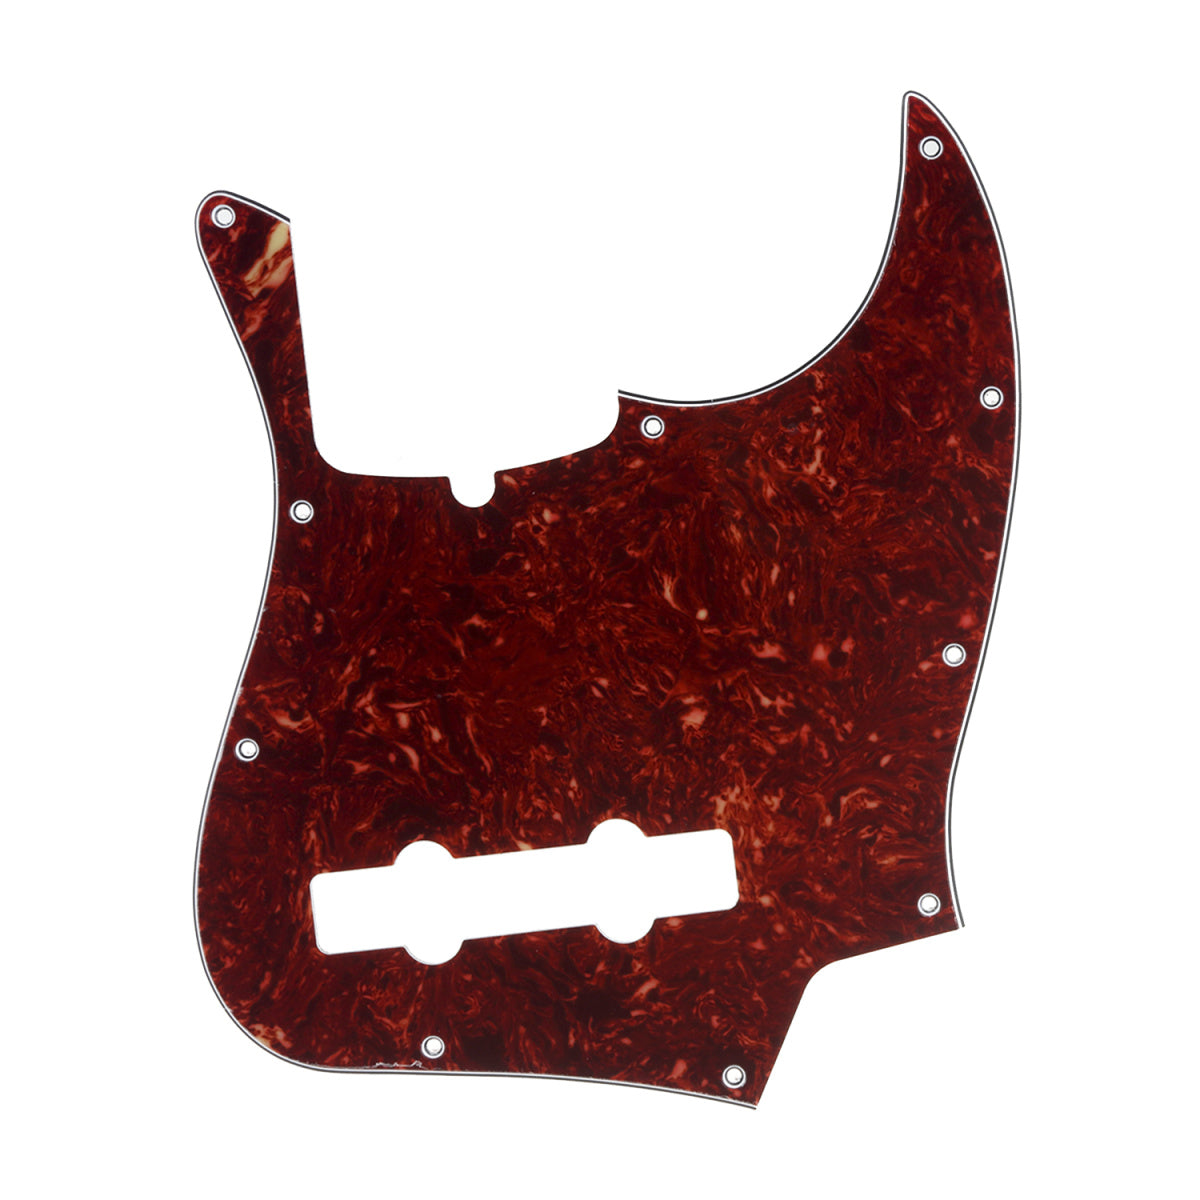 Musiclily Pro 10-Hole Contemporary J Bass Pickguard for Fender Jazz Bass American 5-String, 4Ply Vintage Tortoise